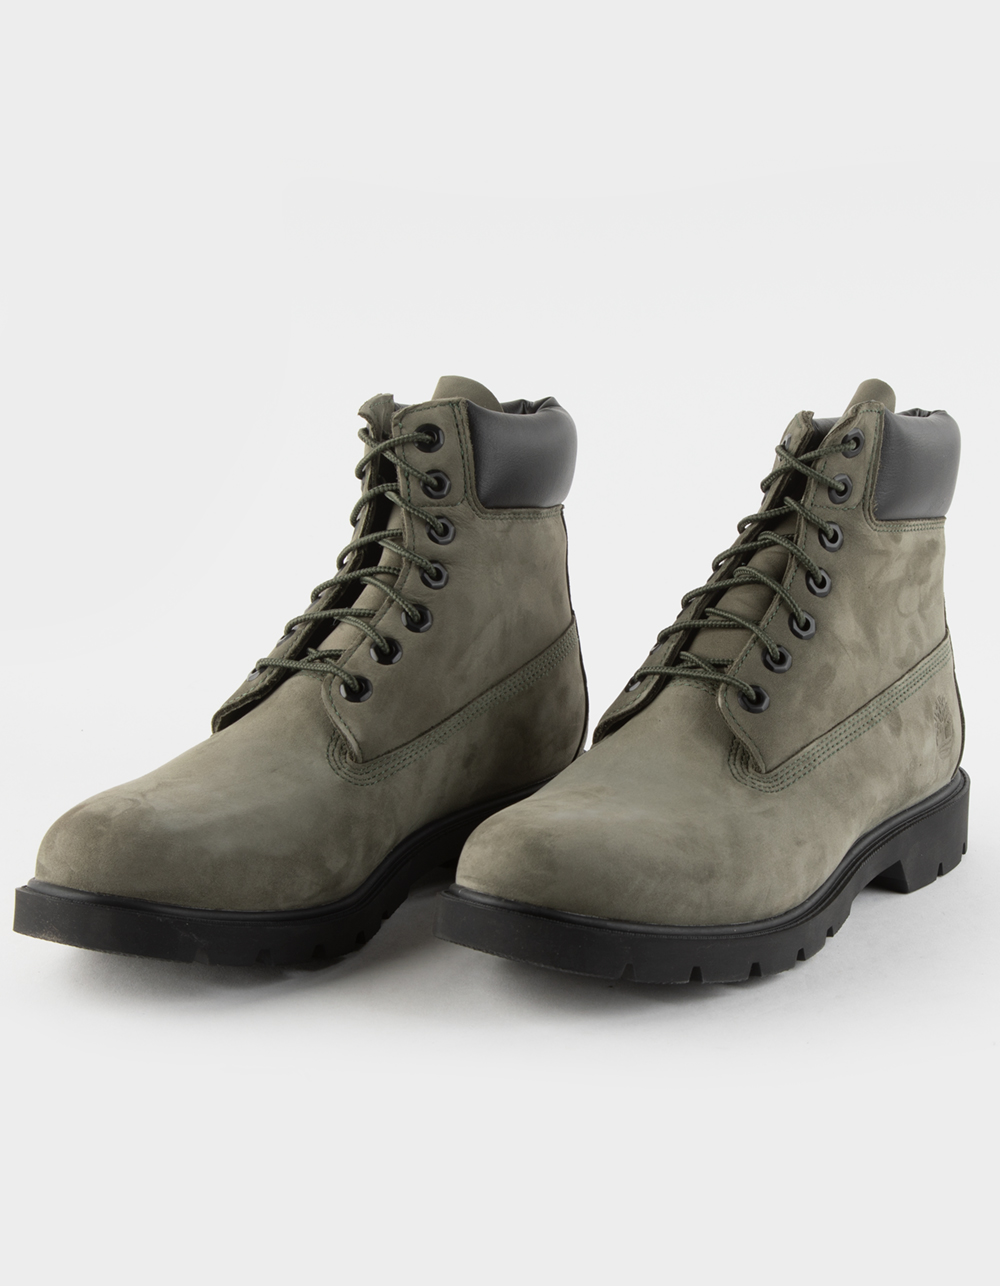 blad Picasso gezagvoerder Timberland Boots & Shoes | Tillys